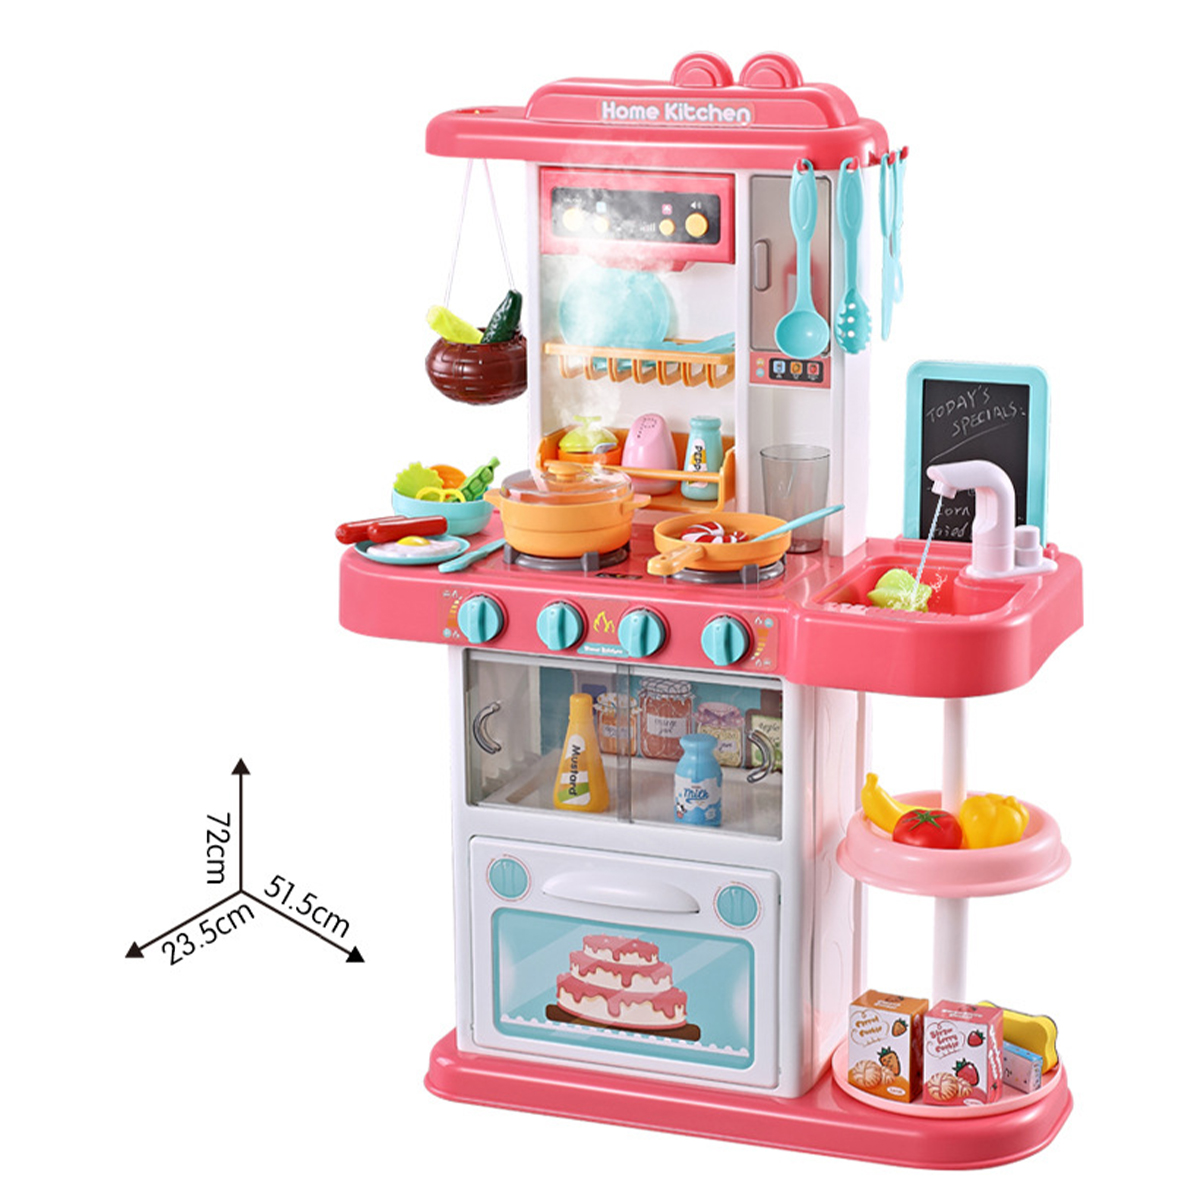 72CM-Height-43-Pcs-ABS-Plastic-Simulation-Spraying-Kitchen-Cooking-Educational-Toy-with-Sound-Light--1710144-11